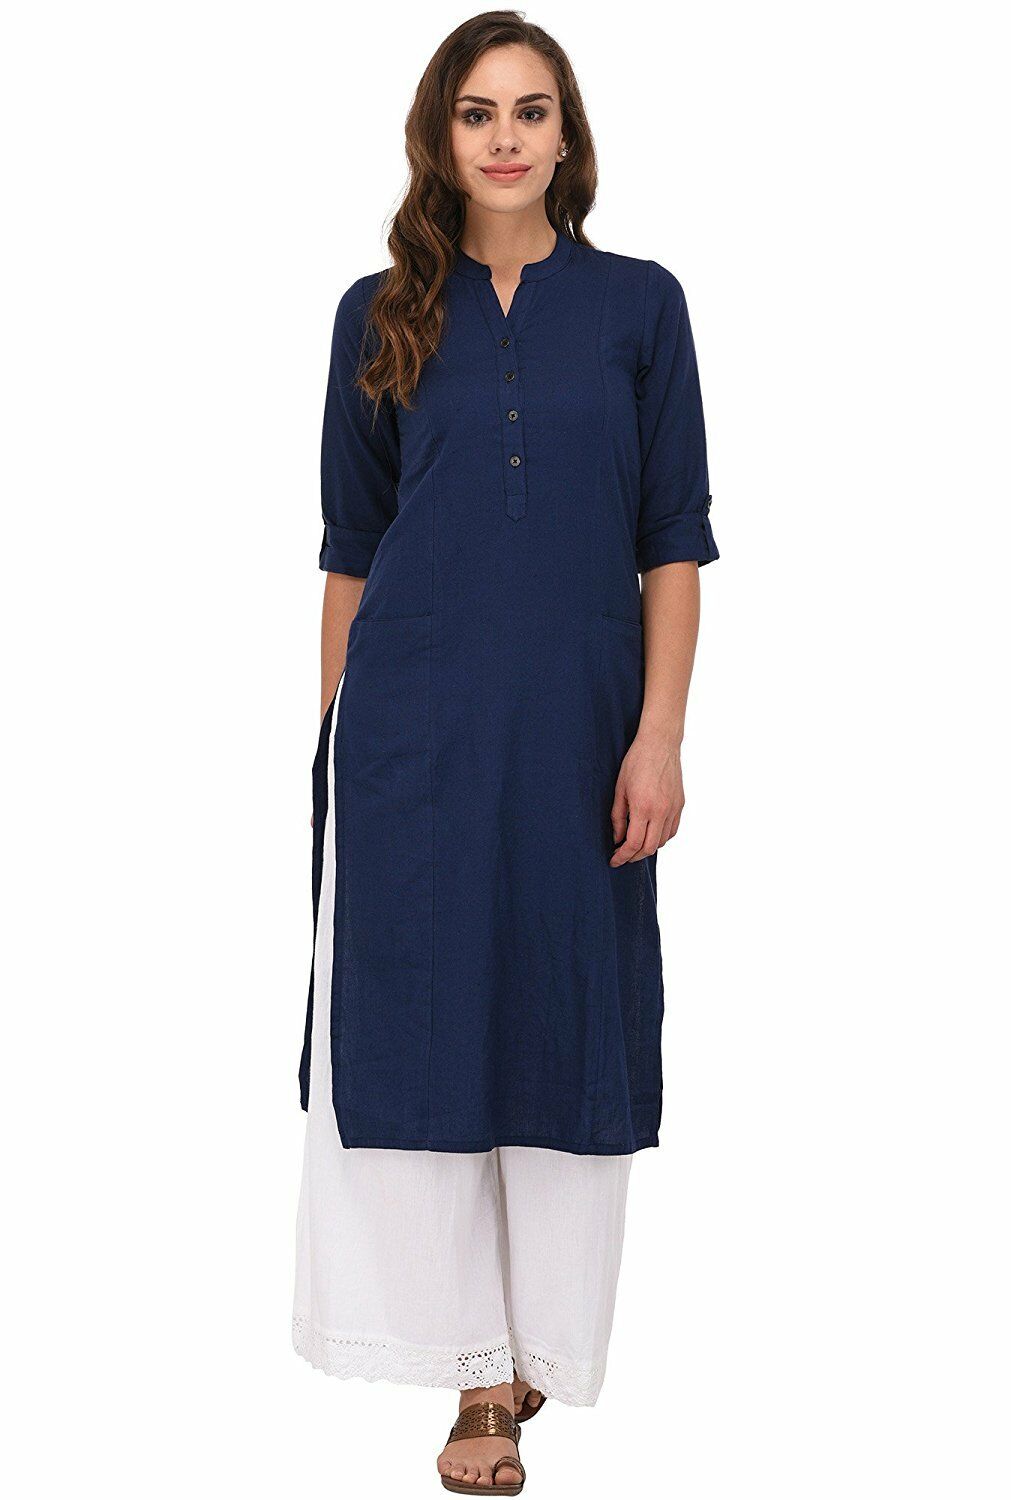 Women's Navy Blue Solid Cotton Kurta with Two Patch Pockets  Plus Size